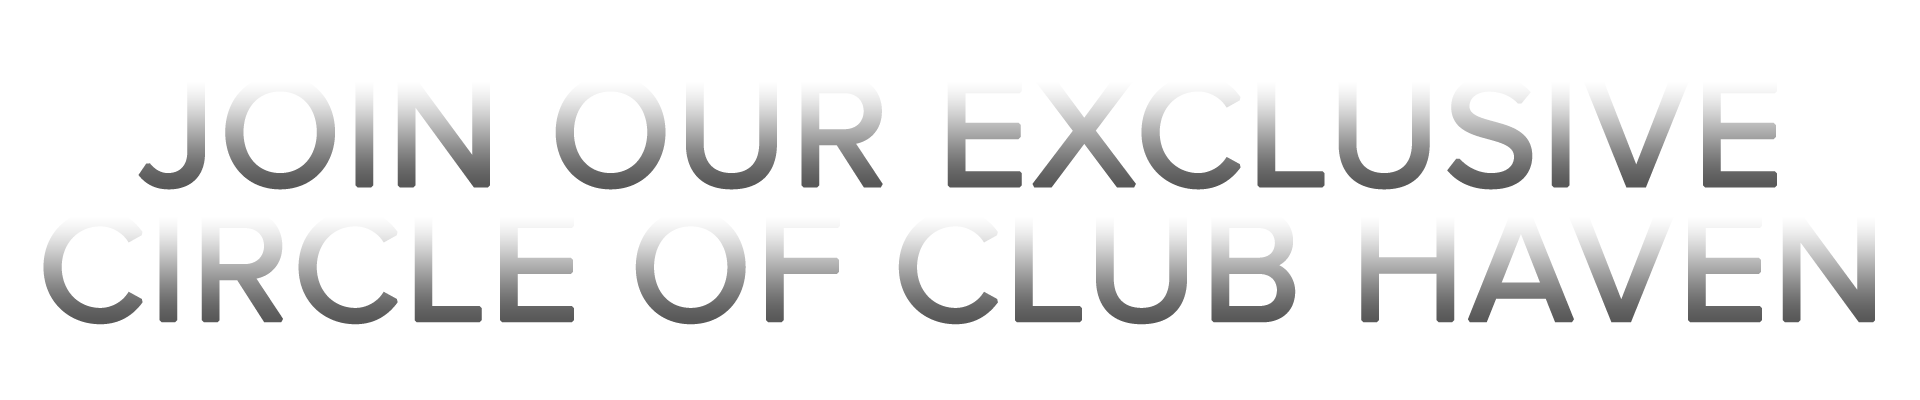 CIRCLE OF CLUB HAVEN title.png